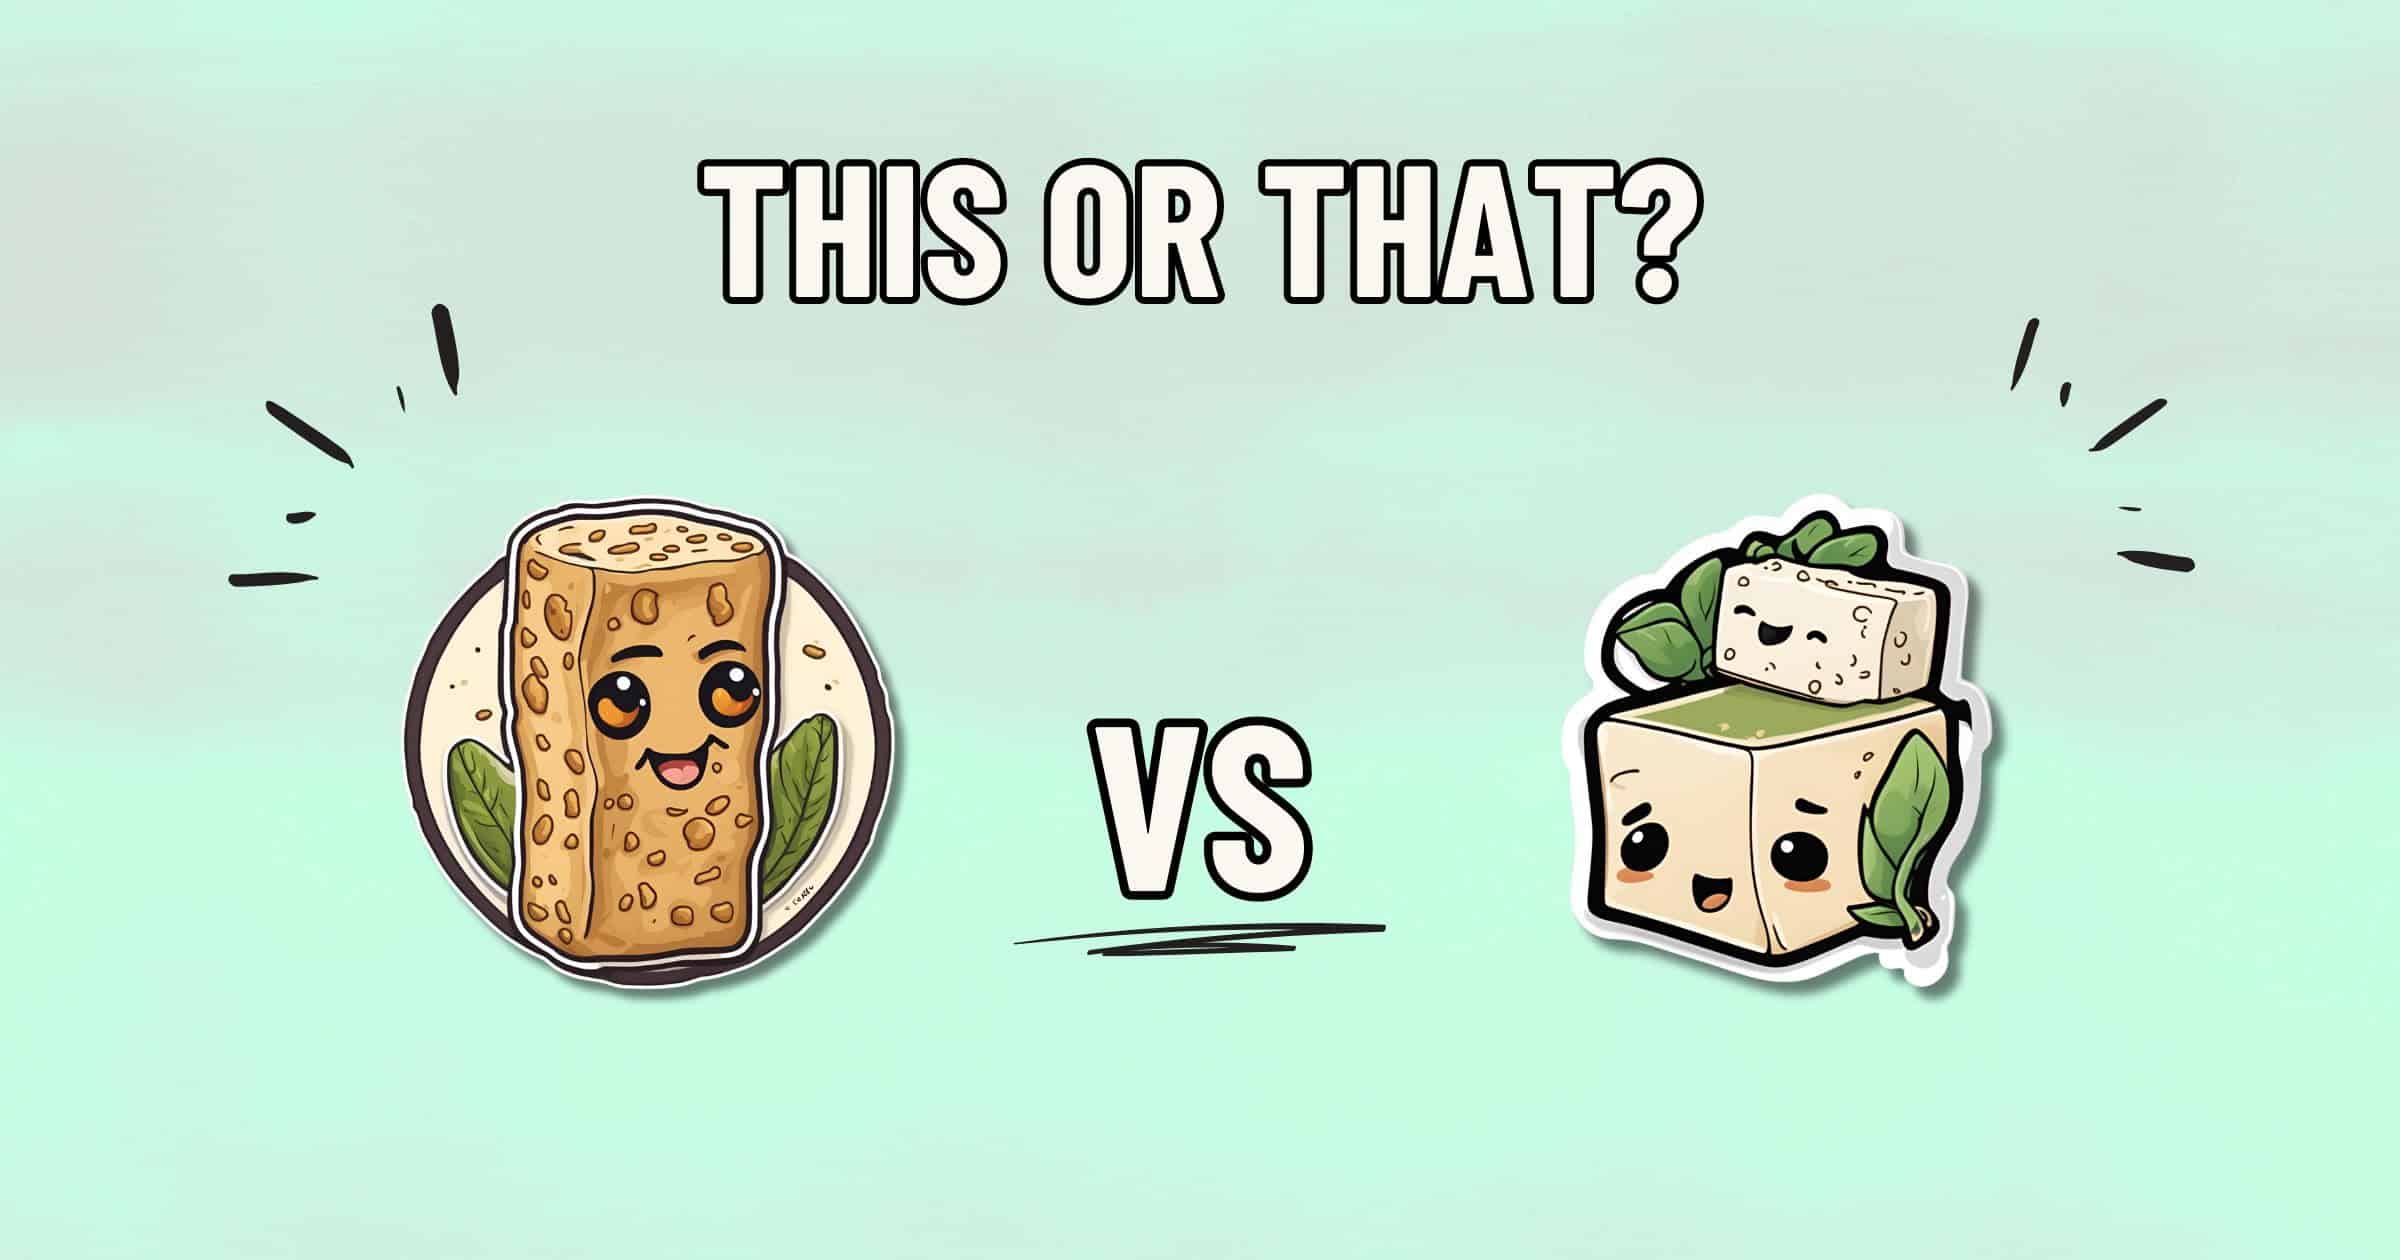 A graphic with "THIS OR THAT?" text at the top. On the left is a cartoon illustration of a happy piece of seitan with "VS" in the middle. On the right is a smiling, healthier tofu block garnished with green leaves. Light green background with decorative lines.